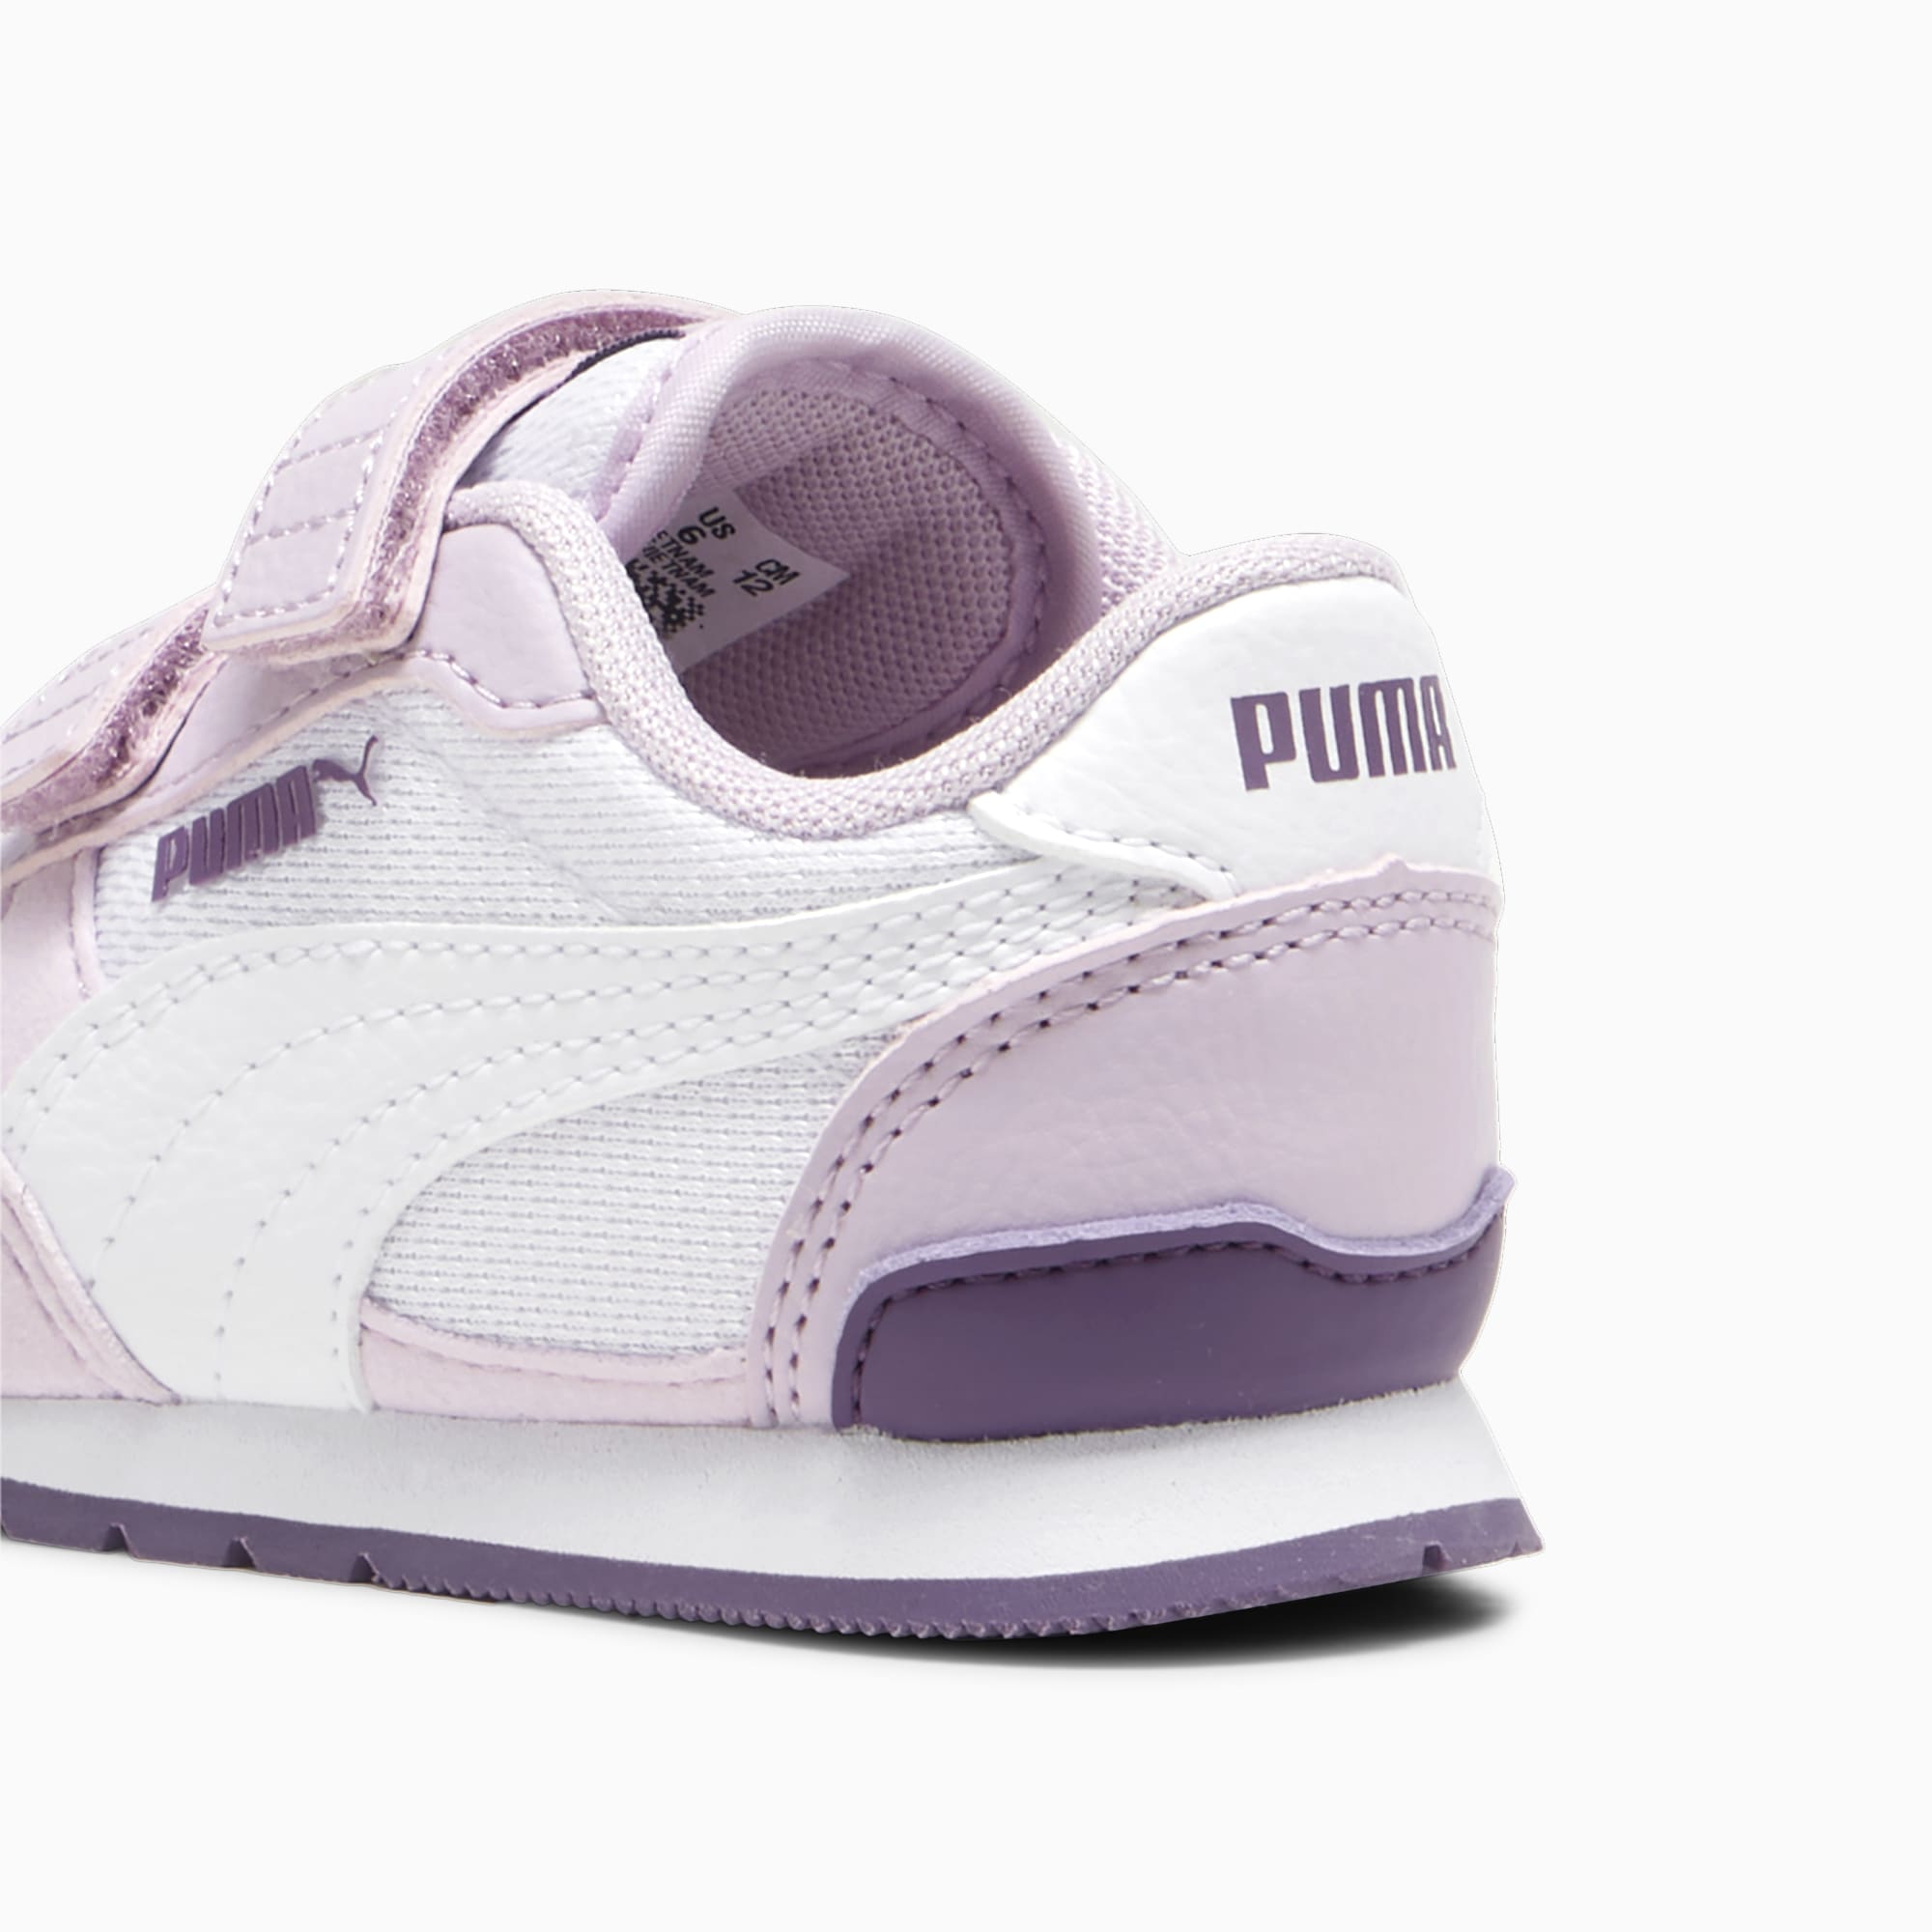 PUMA ST Runner V3 Mesh V Babies' Trainers, White/Grape Mist/Crushed Berry, Size 19, Shoes